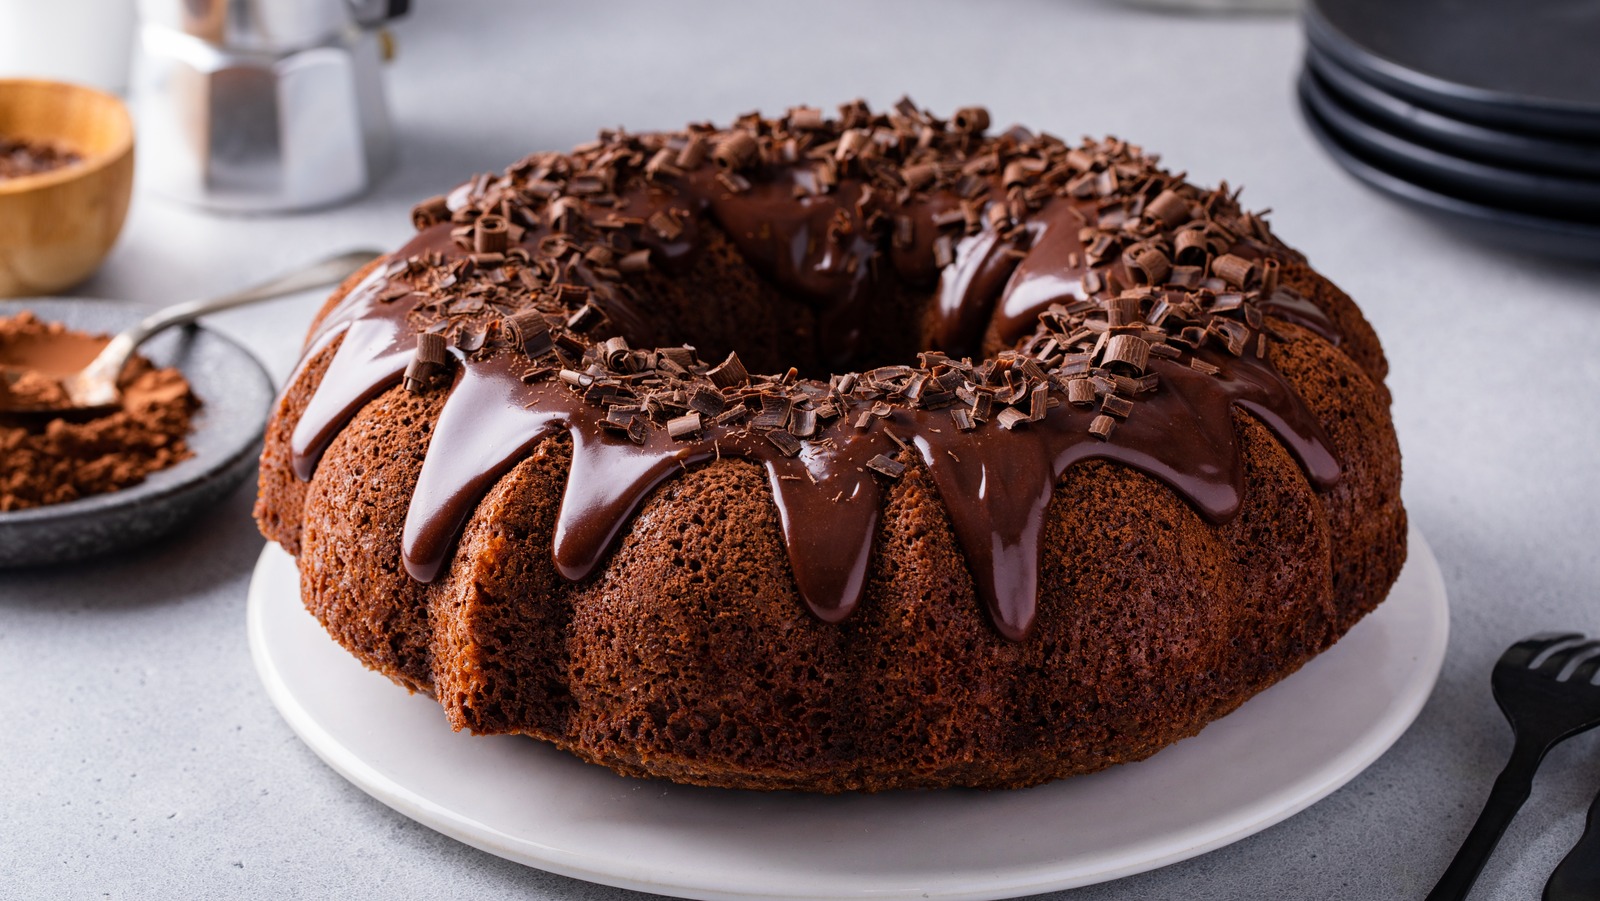 The Soup Can Hack That Instantly Turns Any Cake Pan Into A Bundt Pan